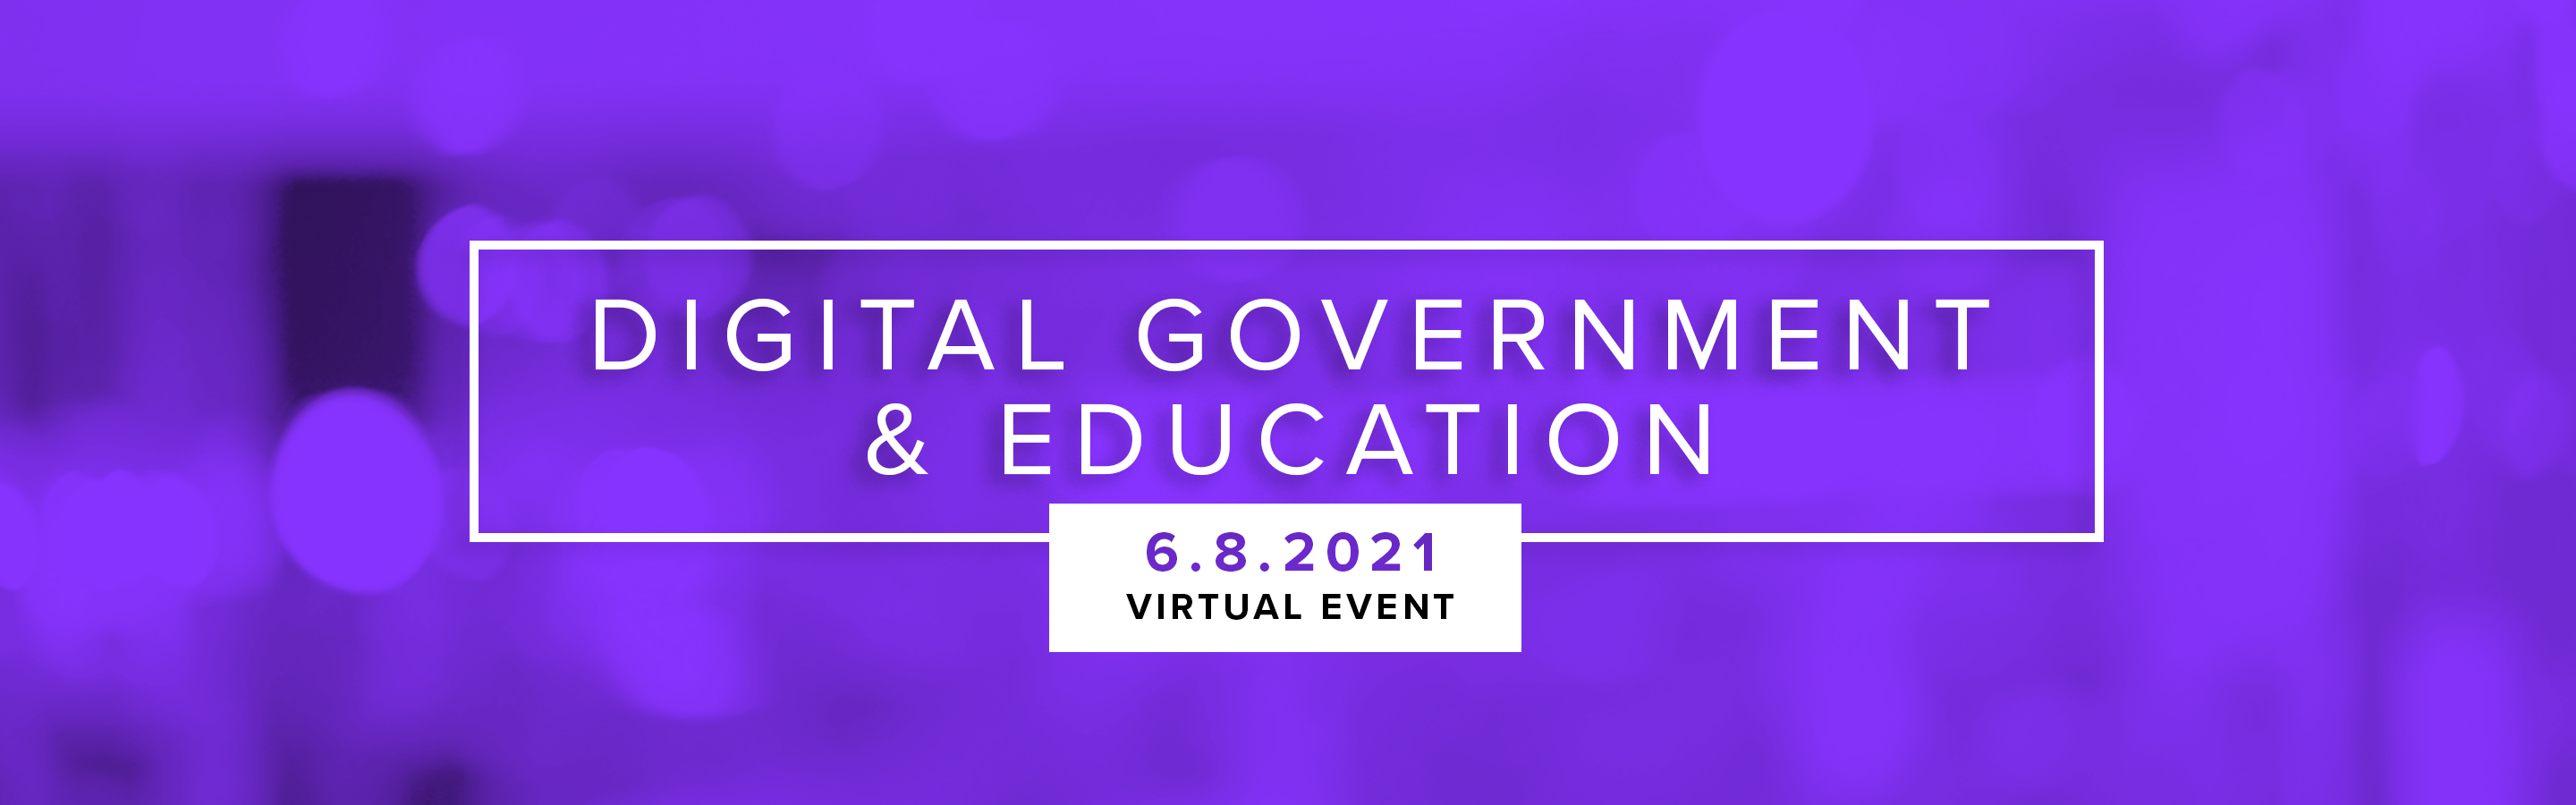 SNG Live Digital Government & Education